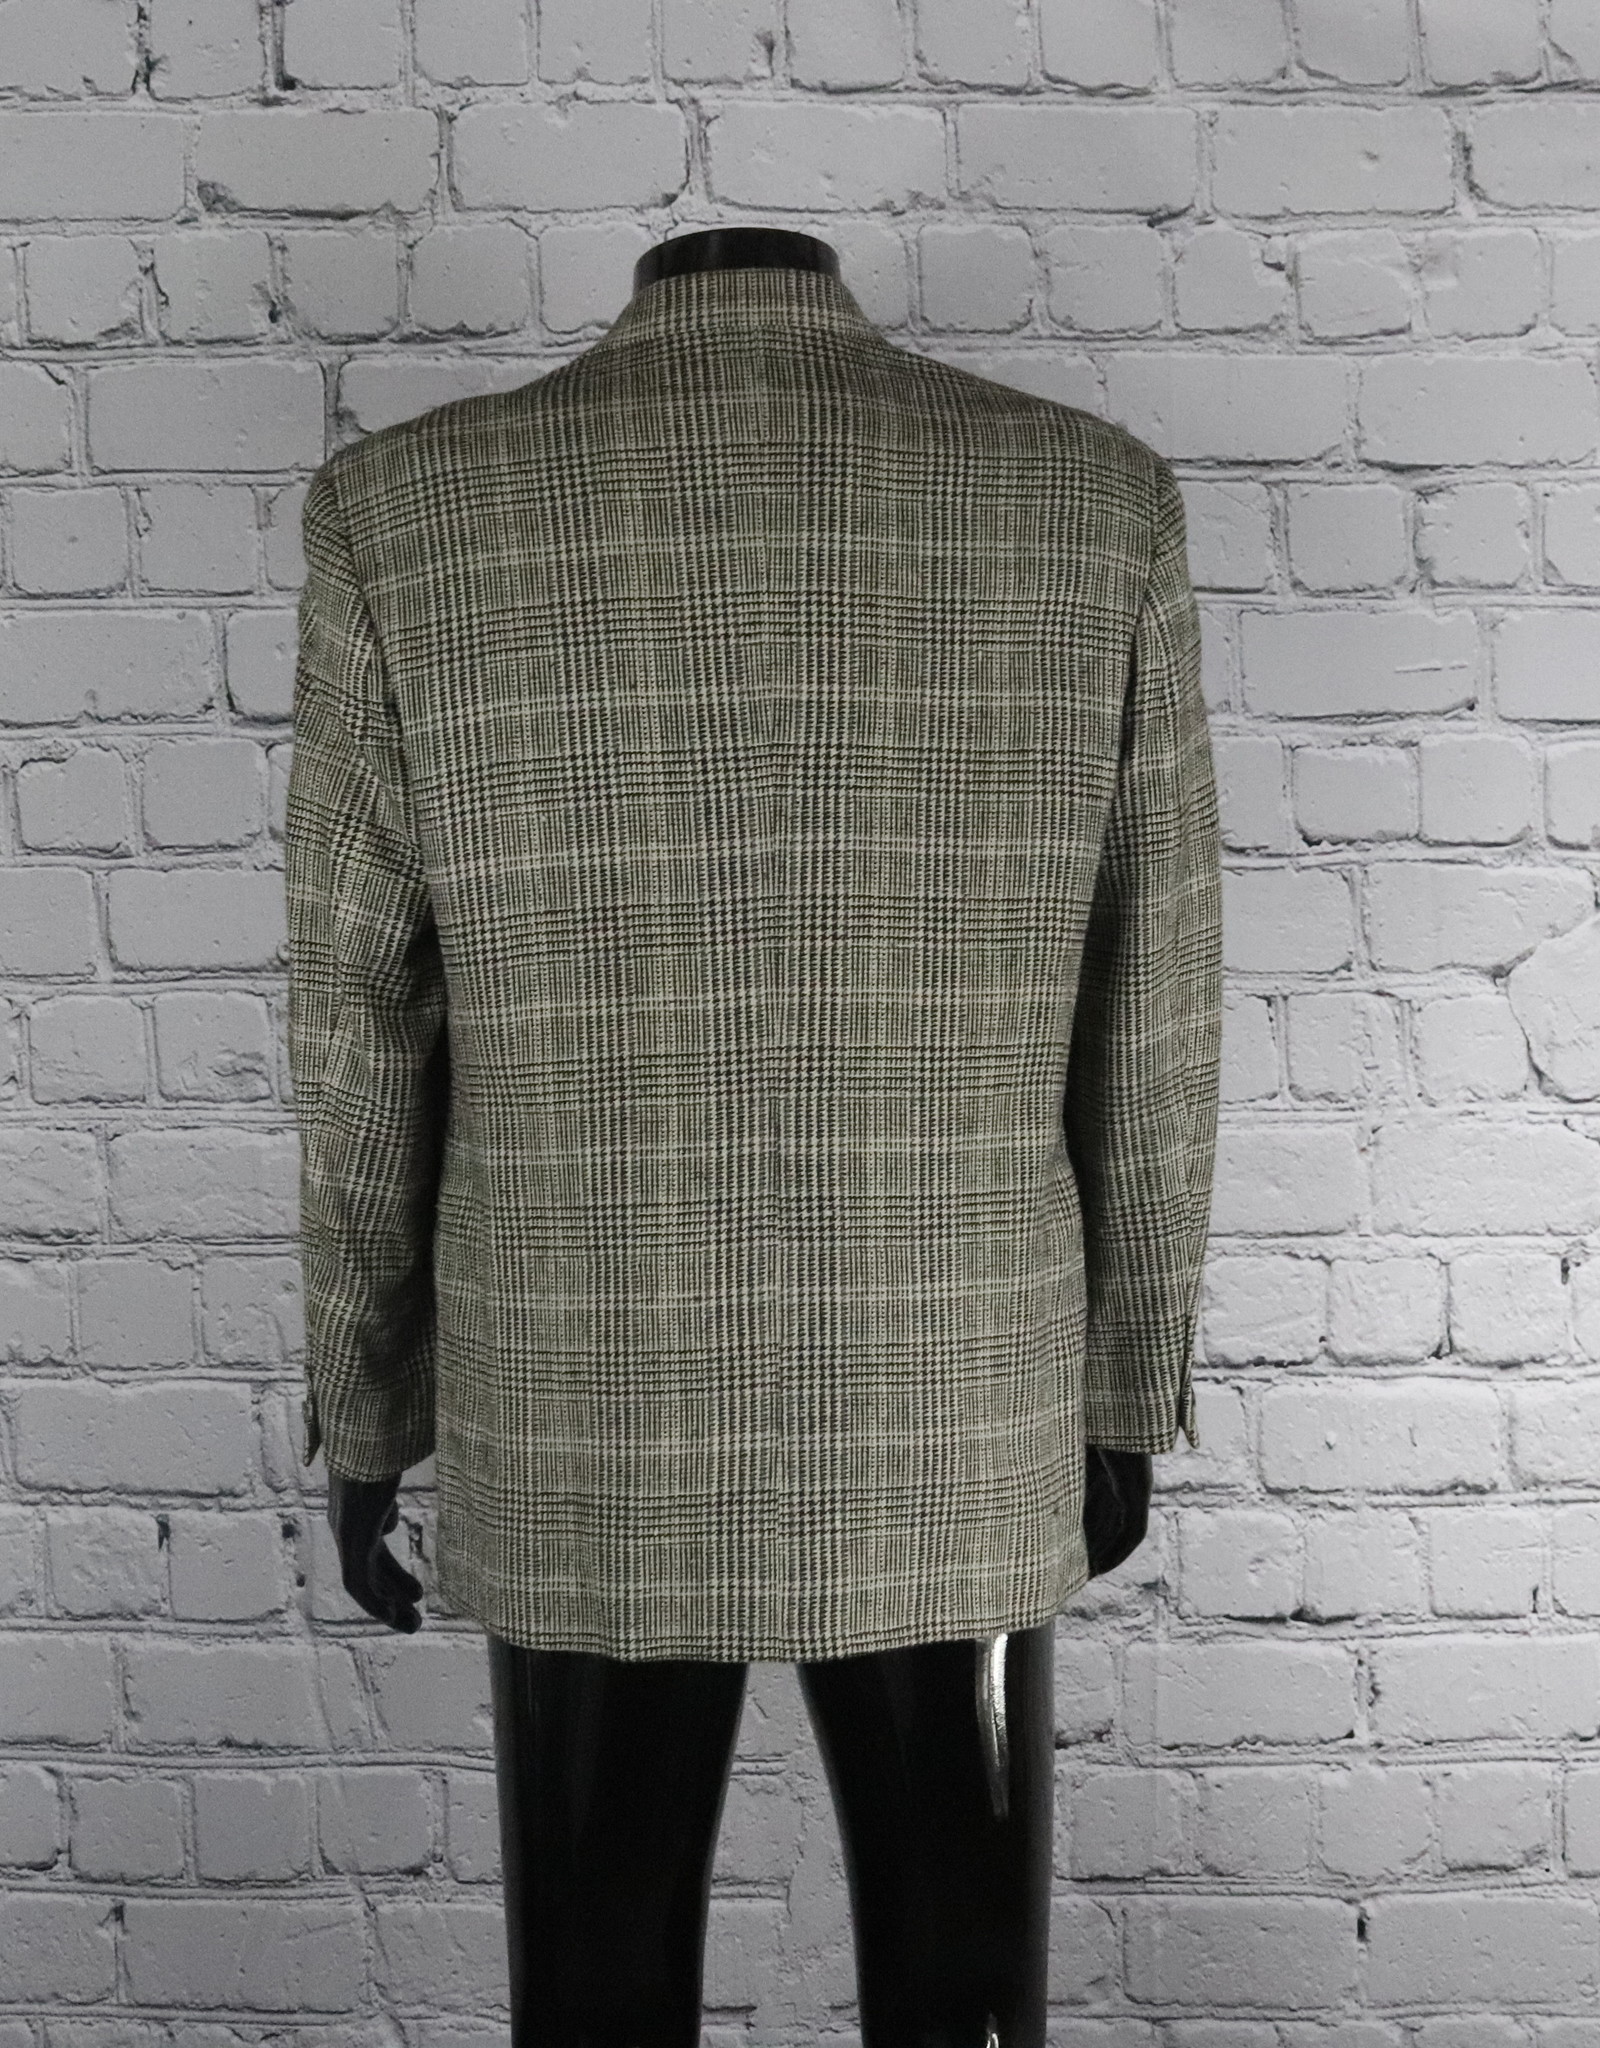 Paul Rodon: Vintage Black and White Double Breasted Hounds Tooth Blazer for Guys